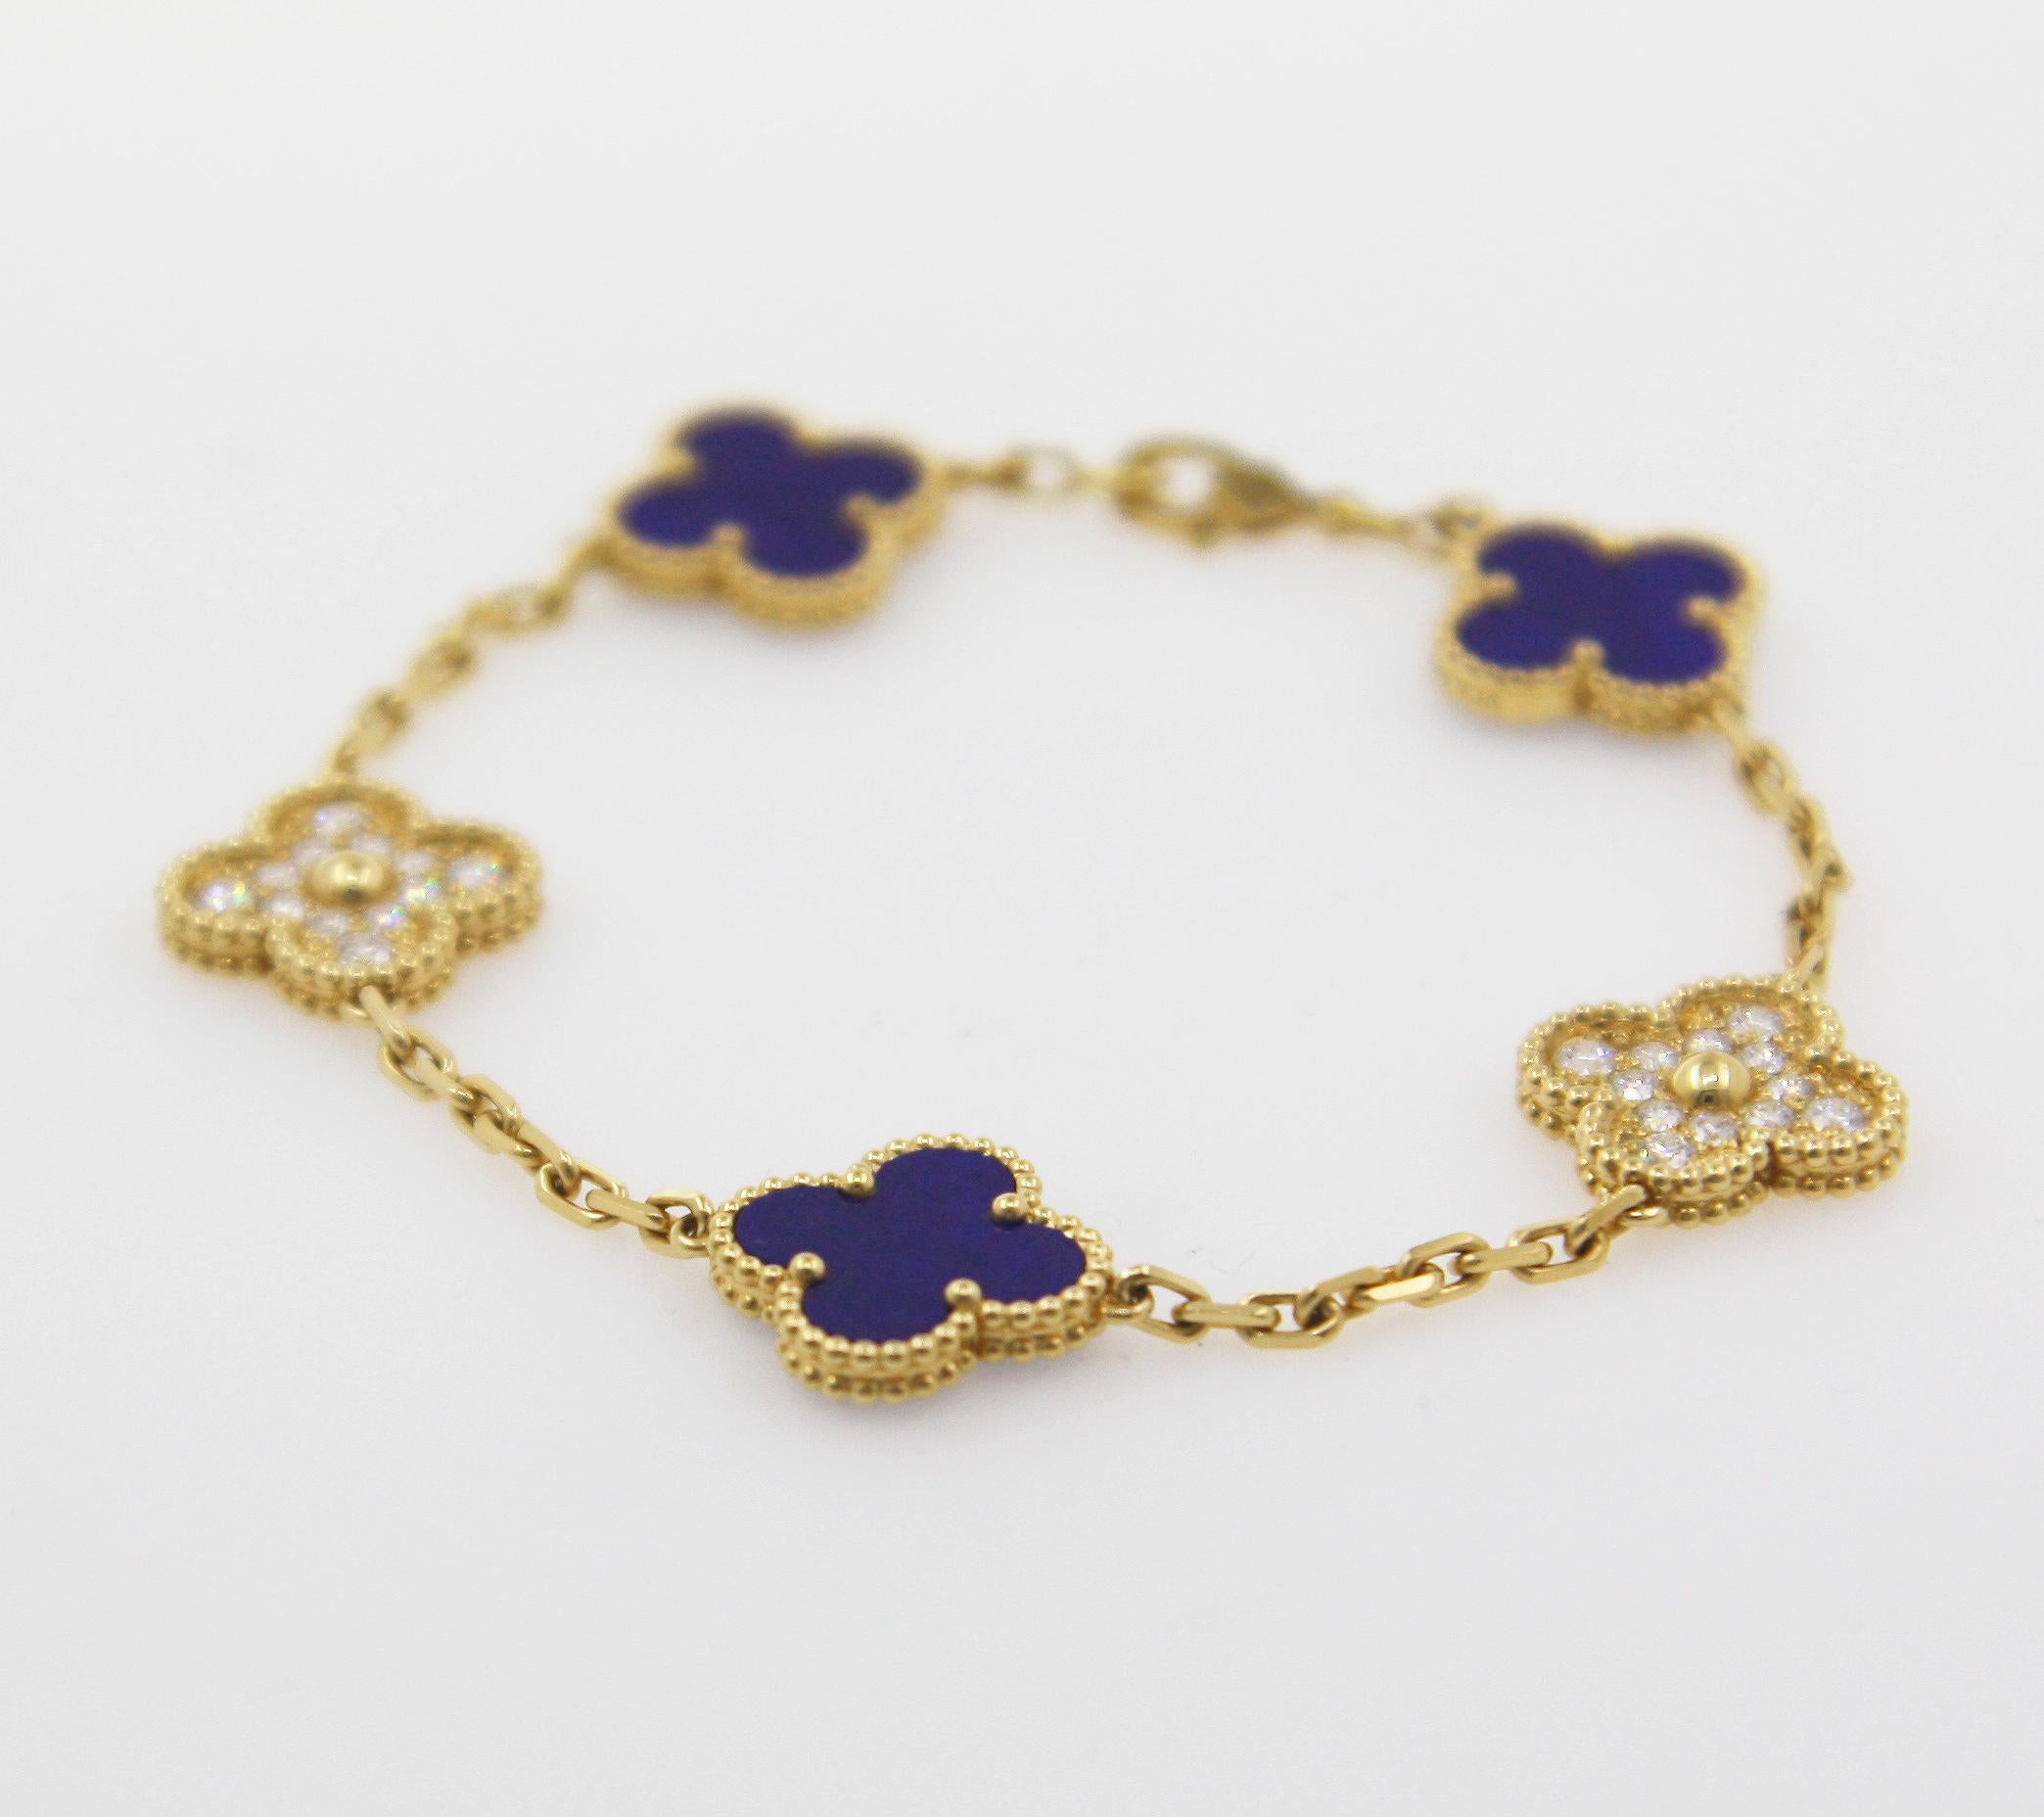 Vintage Alhambra bracelet, 5 motifs, yellow gold, Lapis, round diamonds; diamond quality DEF, IF to VVS.
Diamond(s) : 24 stones, 0.96 carats
Lapis : 3 stones
Wrist Size : 7.2 inches
Come with box and certificate.
Reference # ARP2LN00
VCA269